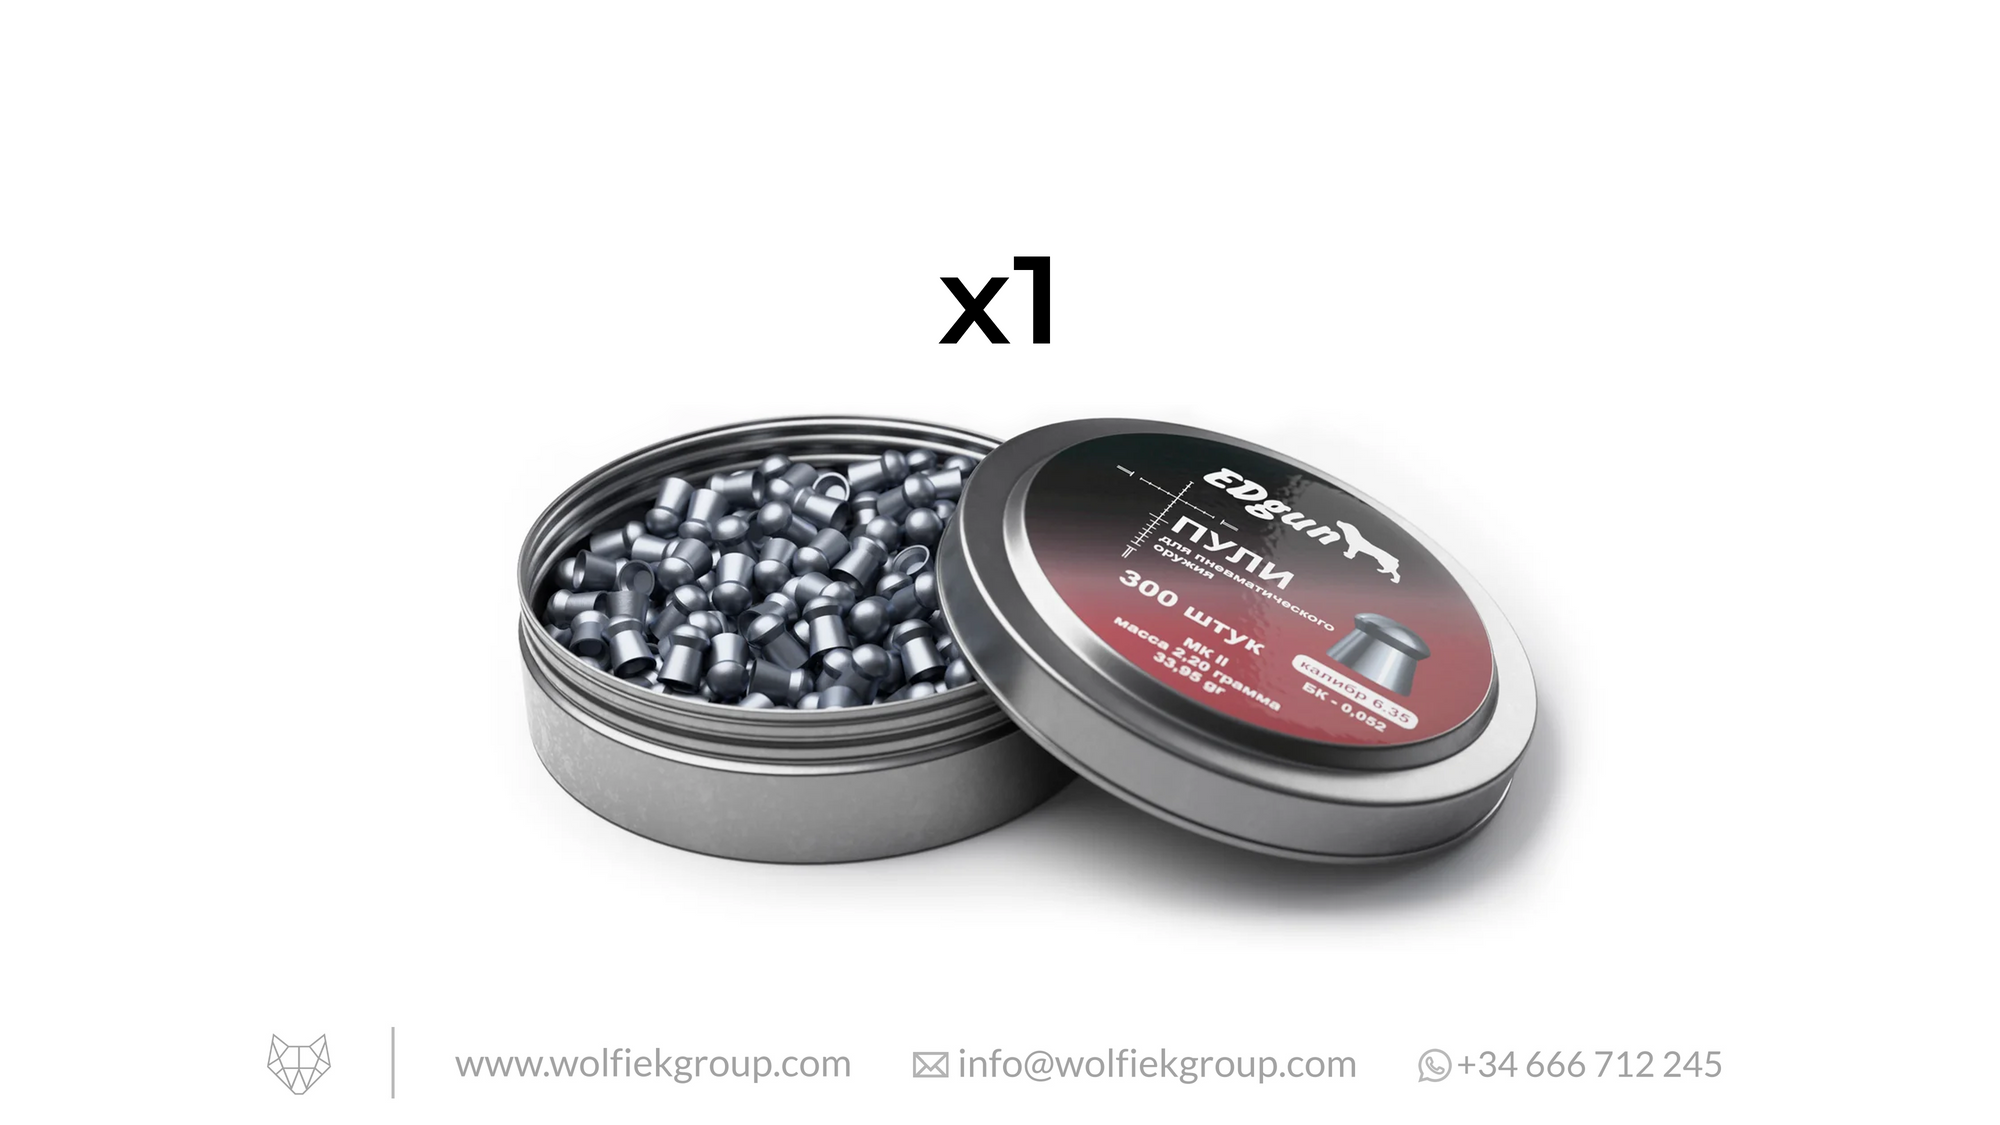 EDgun Premium Pellets Cal .25 (6,35mm) Weight 2,20g (33,95gr) MKII with text buy 4 get 1 for free